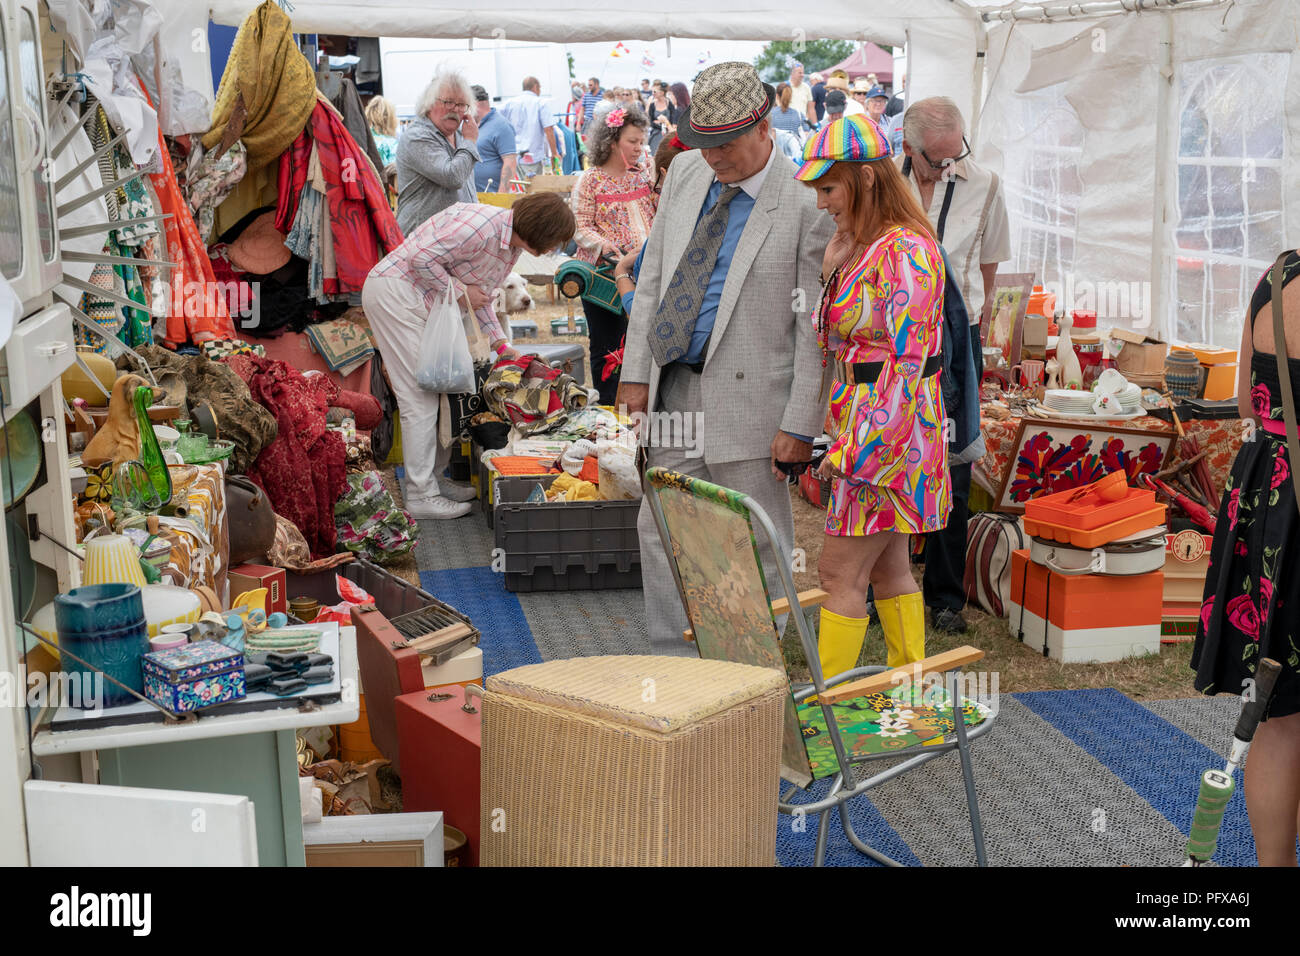 Colourful Vintage stall selling old fashioned household items at a vintage retro festival. UK Stock Photo